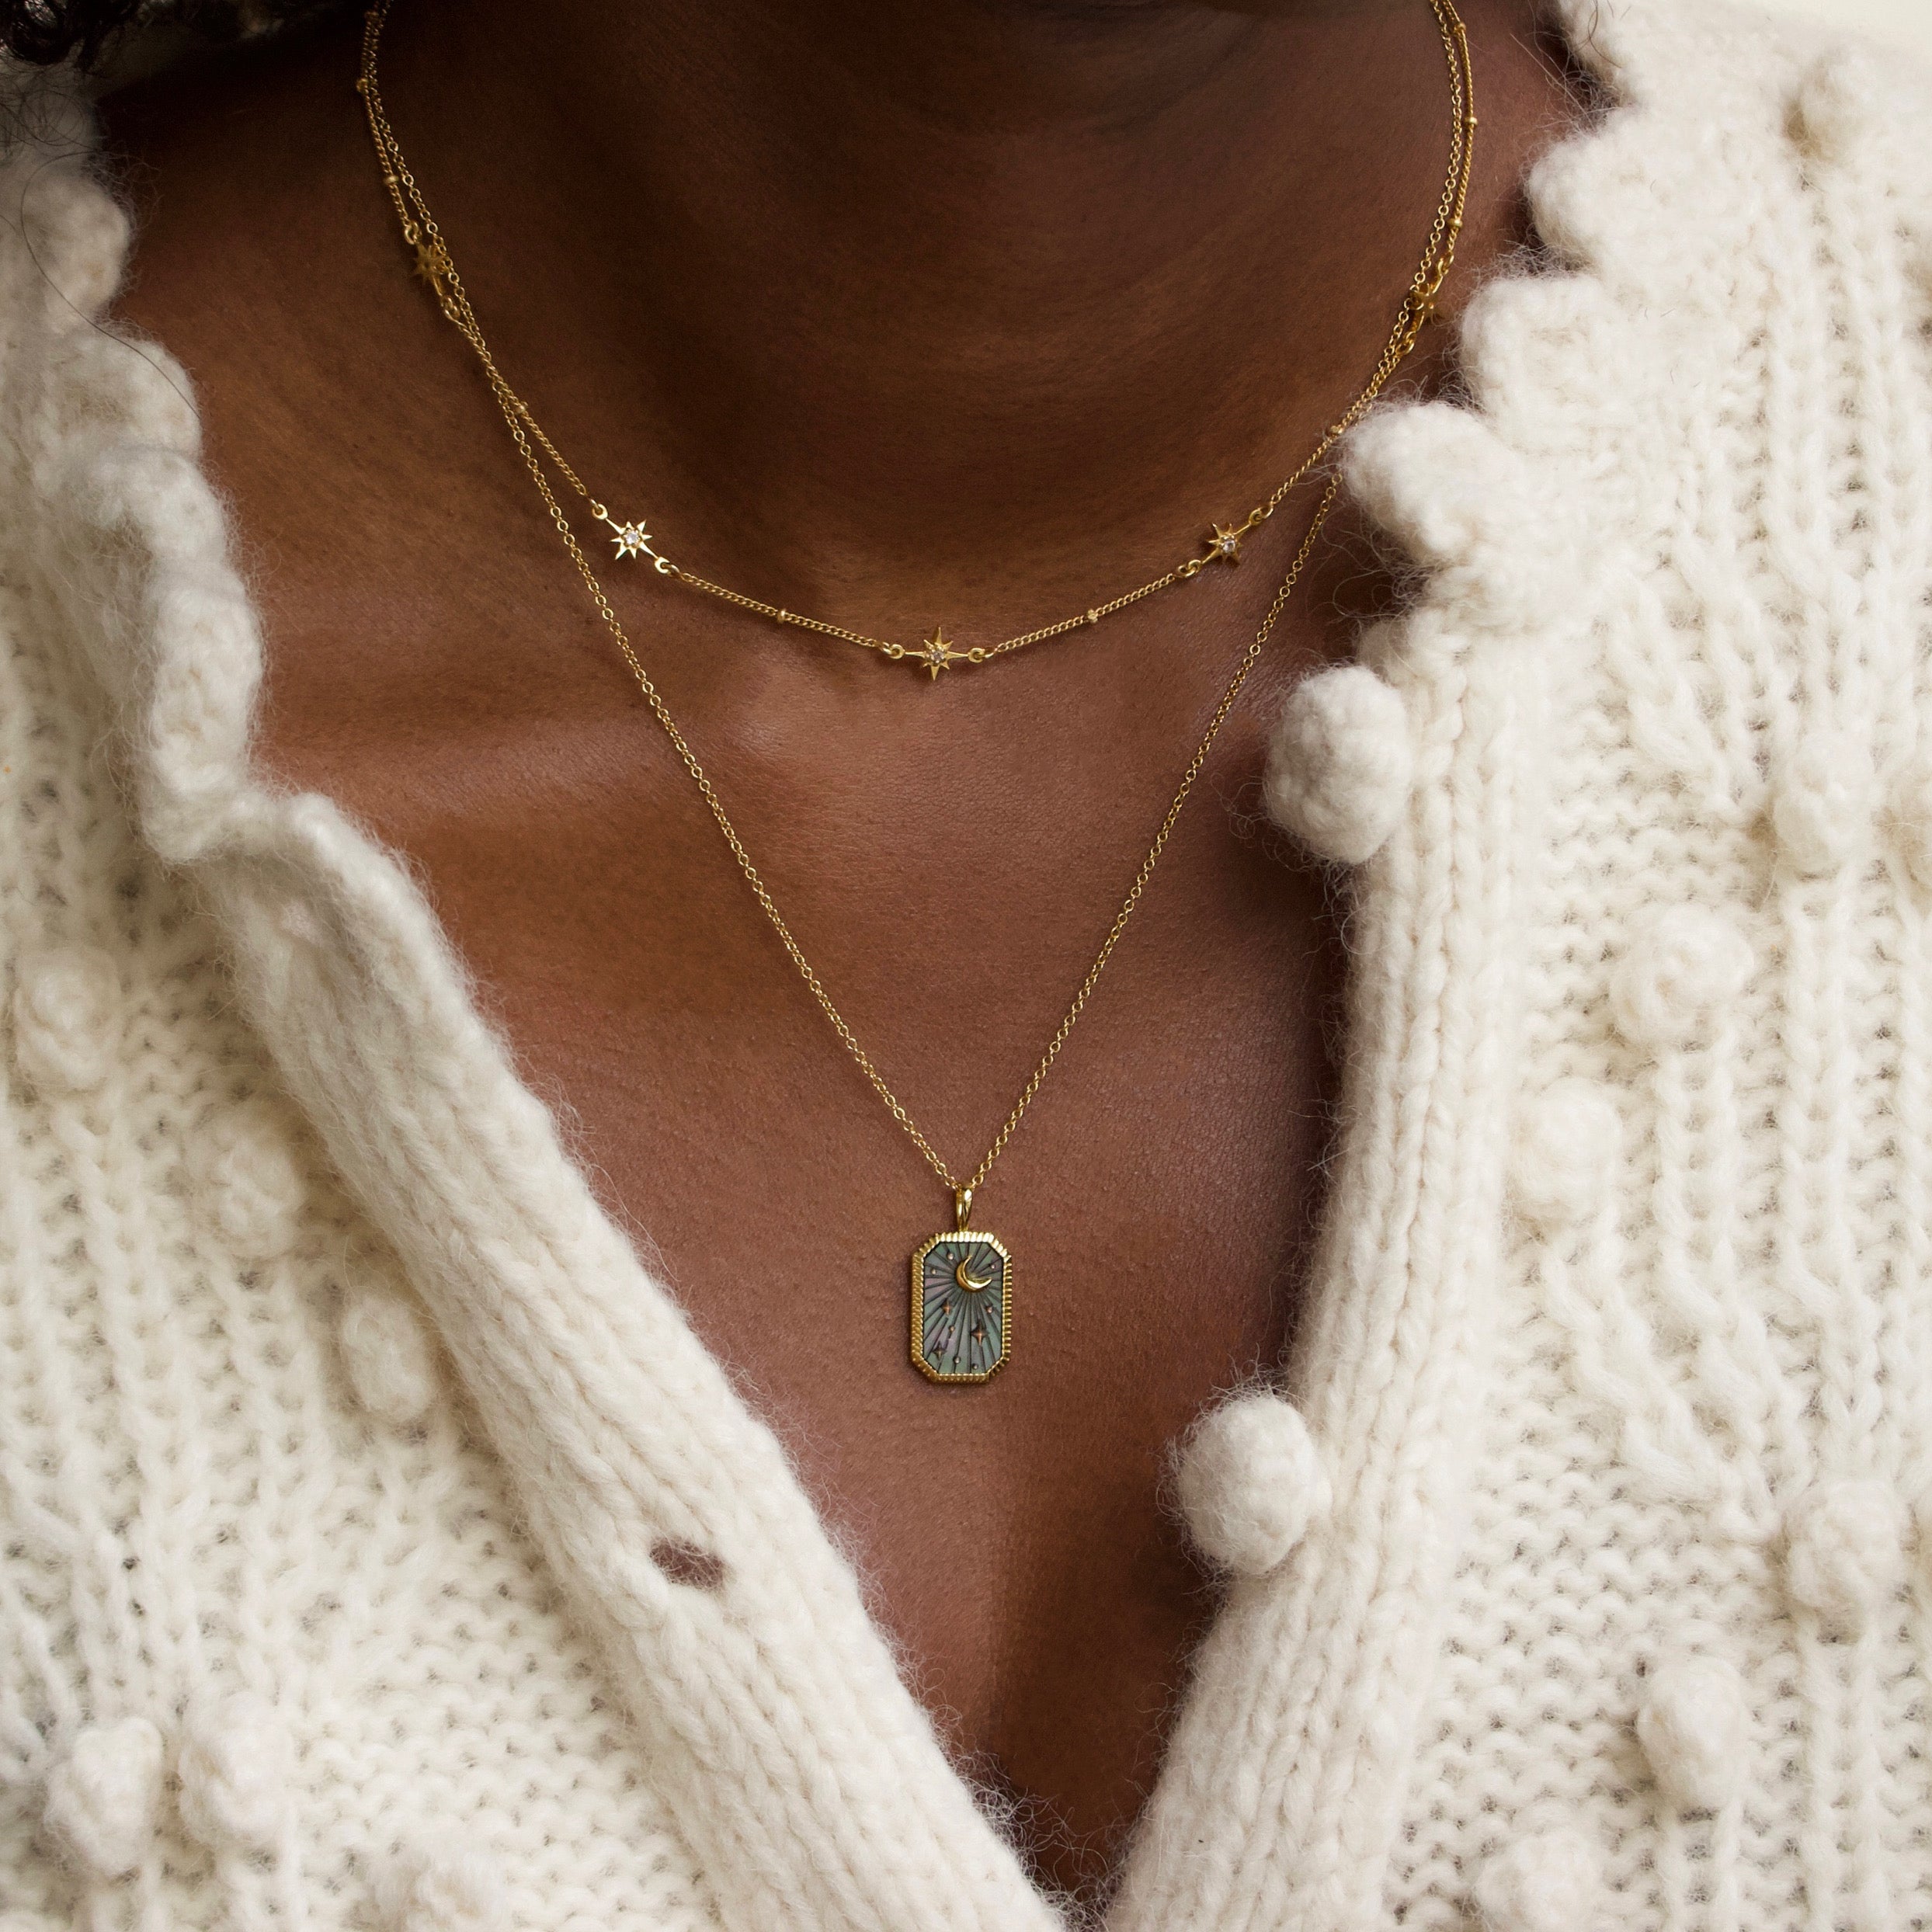 Black Mother of pearl tarot card necklace in gold